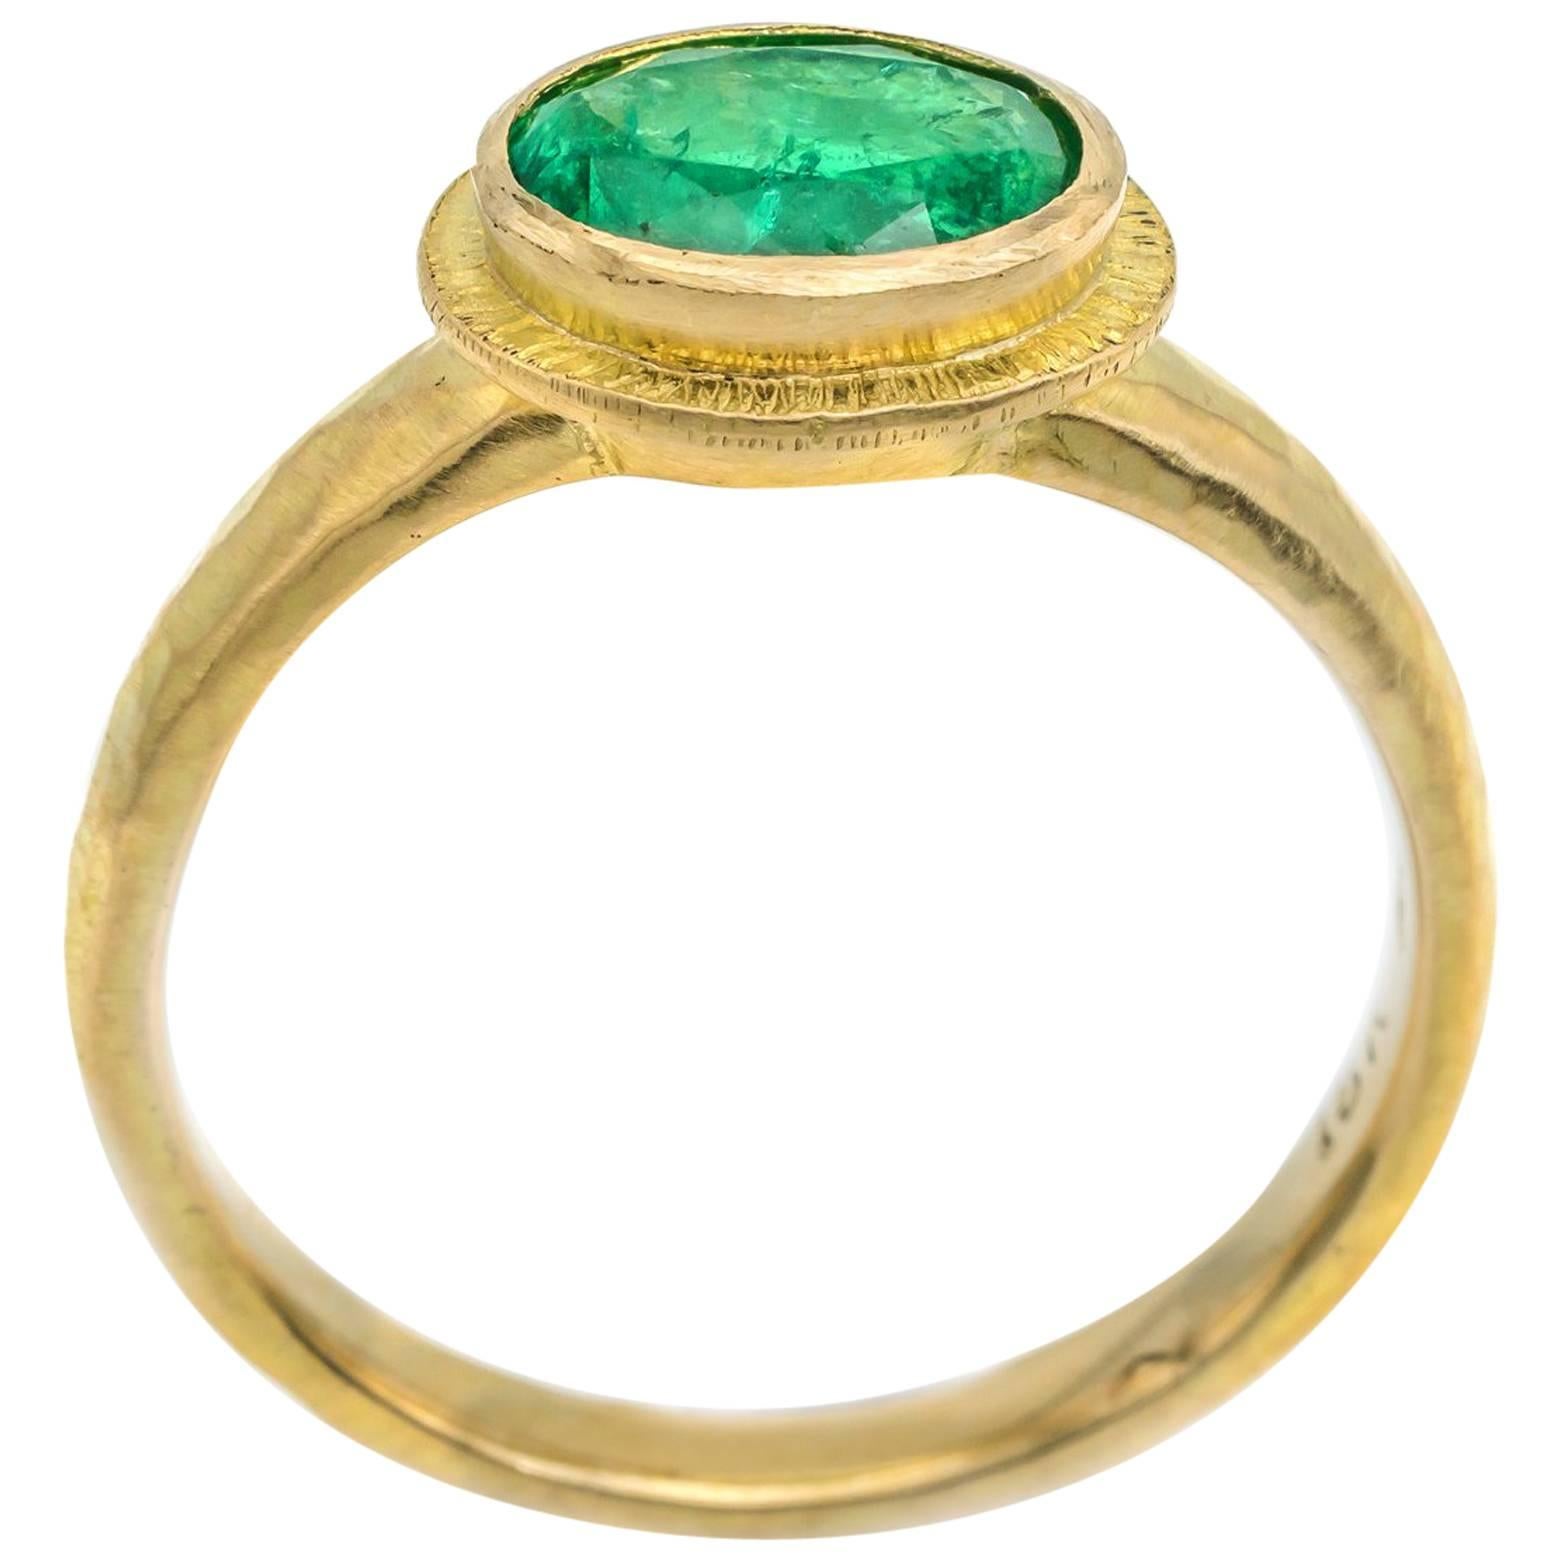 Oval Emerald Ring in 18 Karat Yellow Gold, Hammered and Textured, 0.90 Carat